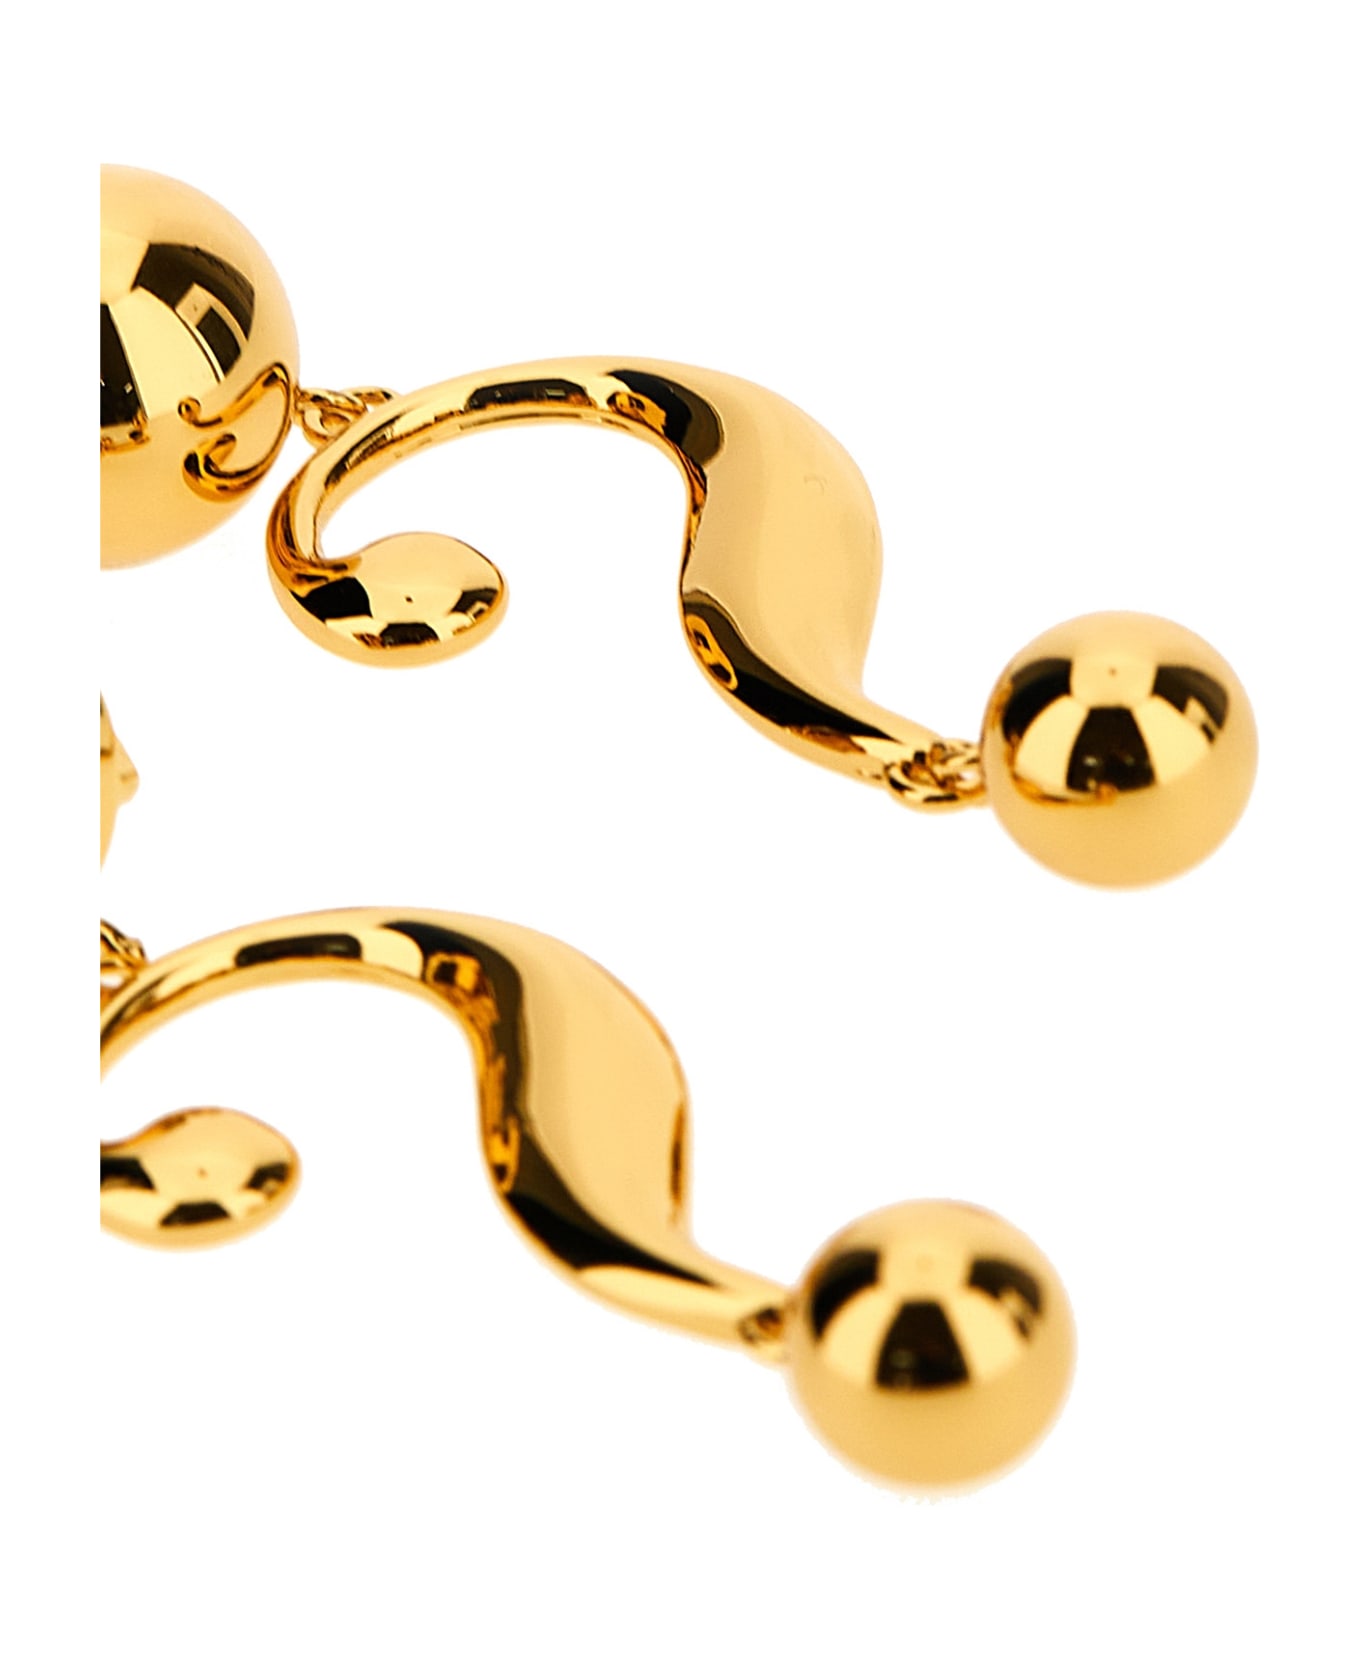 Moschino 'question Mark' Earrings - Gold ジュエリー